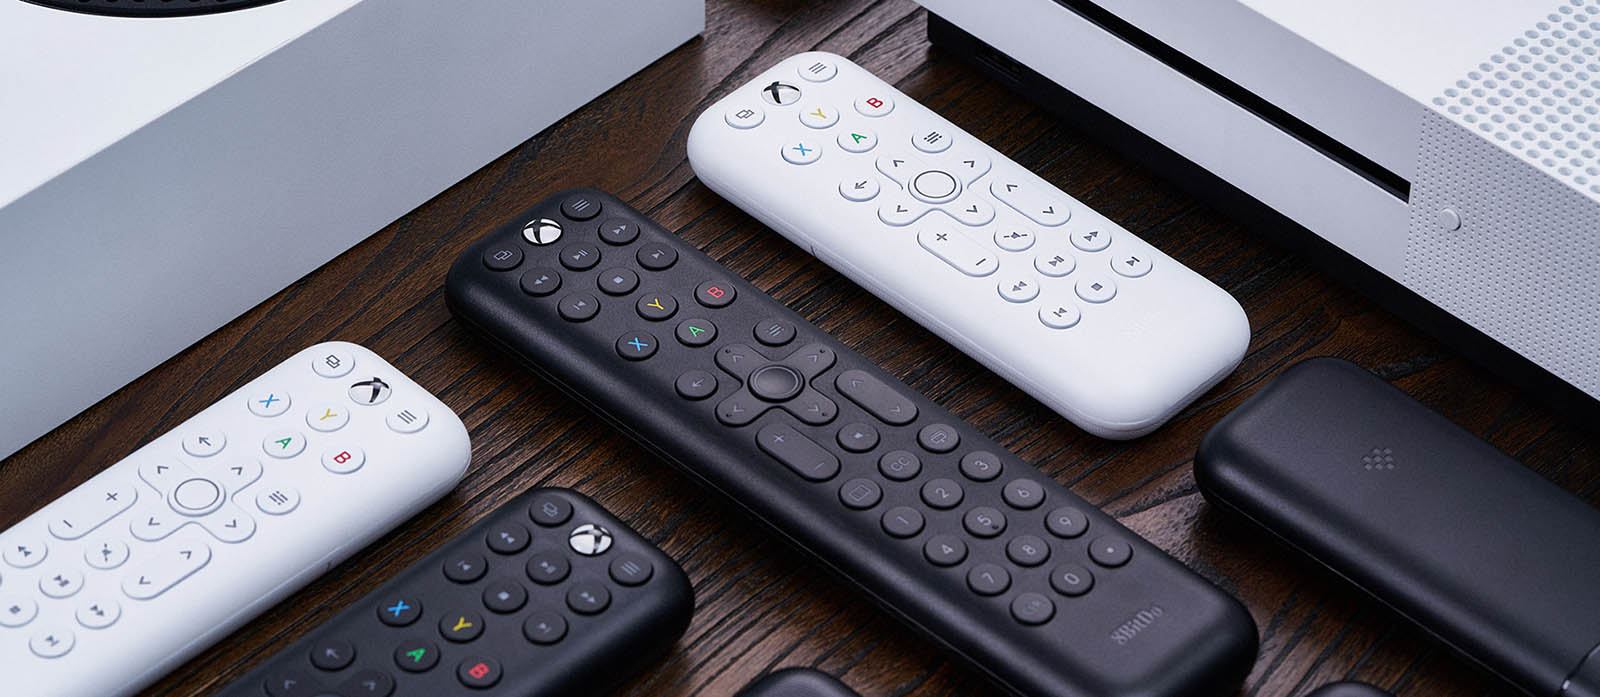 Product image showing two remote controls from 8BitDo